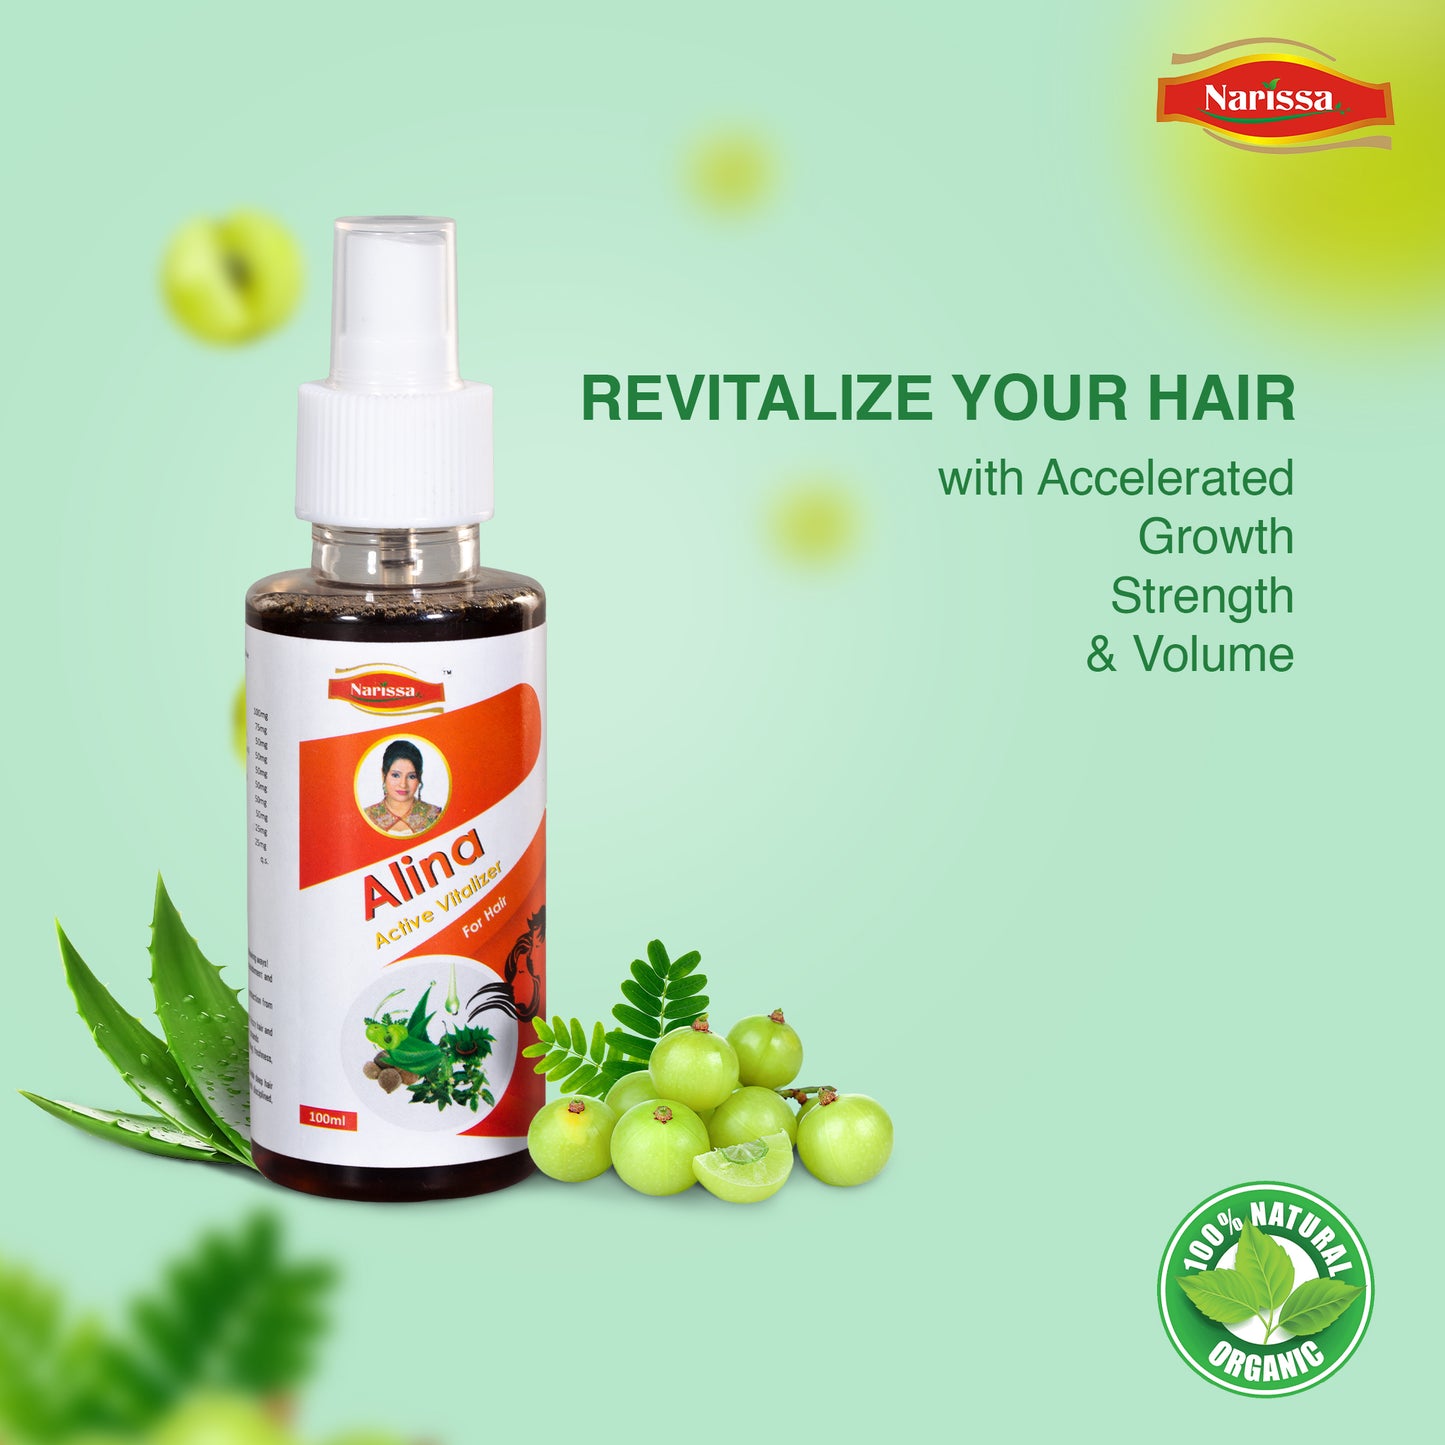 Alina Active Hair Vitalizer - Revitalize Your Hair with Natural Nourishment